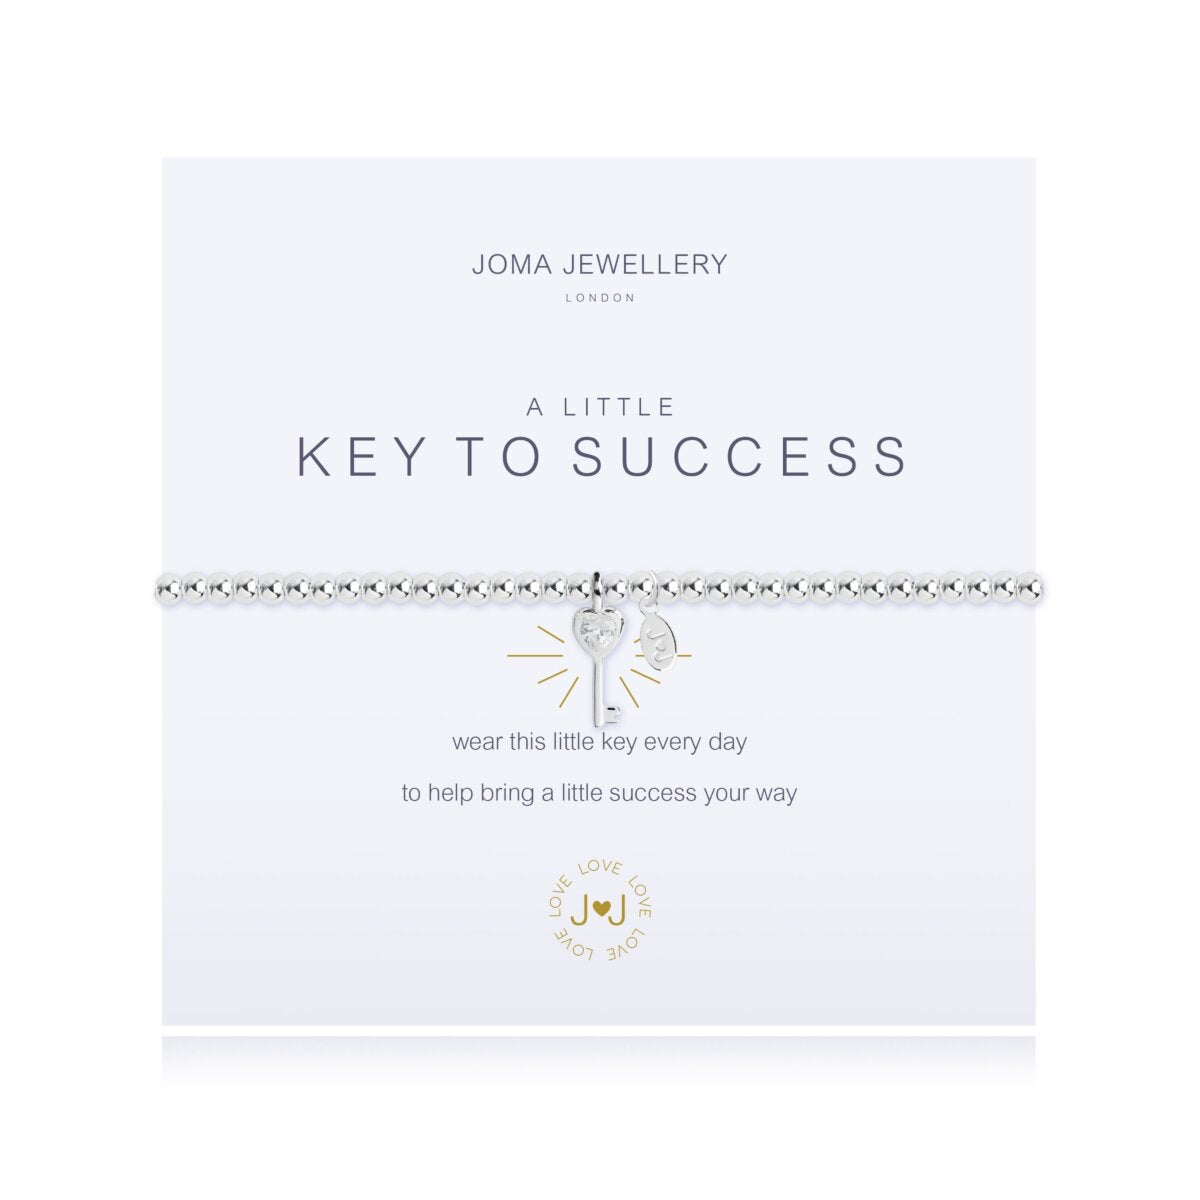 Joma Jewellery 'A Little' Key To Sucess